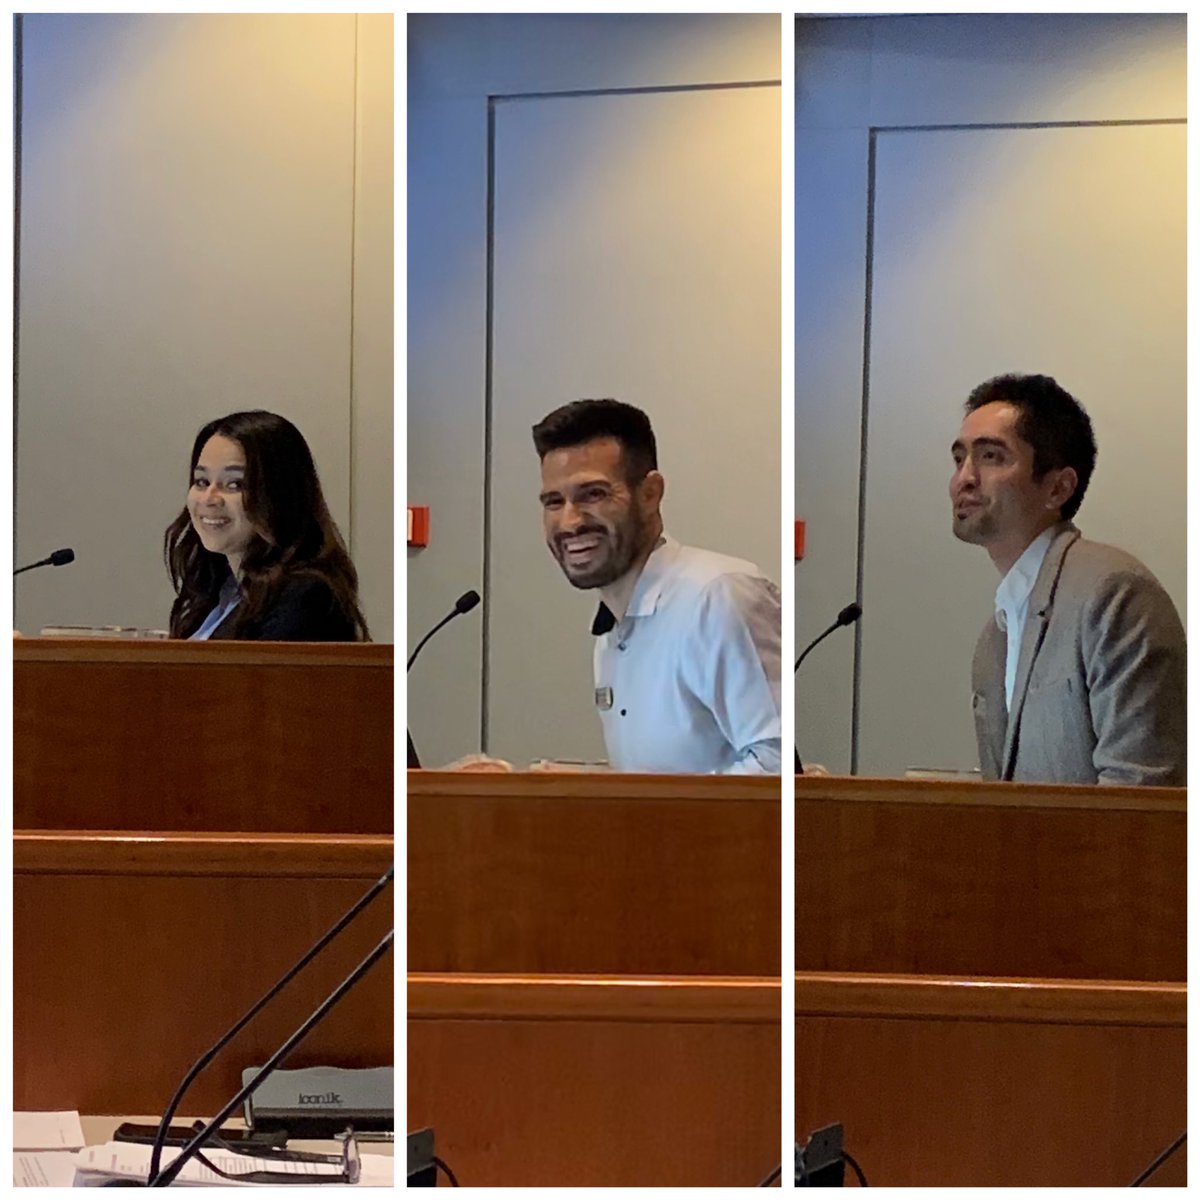 #EarlierToday: My newest Dept staff were introduced for the first time to the #BoardofTrustees. They all got a chance to address the Board from behind the lectern, and all did amazing! #Introductions #NewEmployees #CommunityAffairs